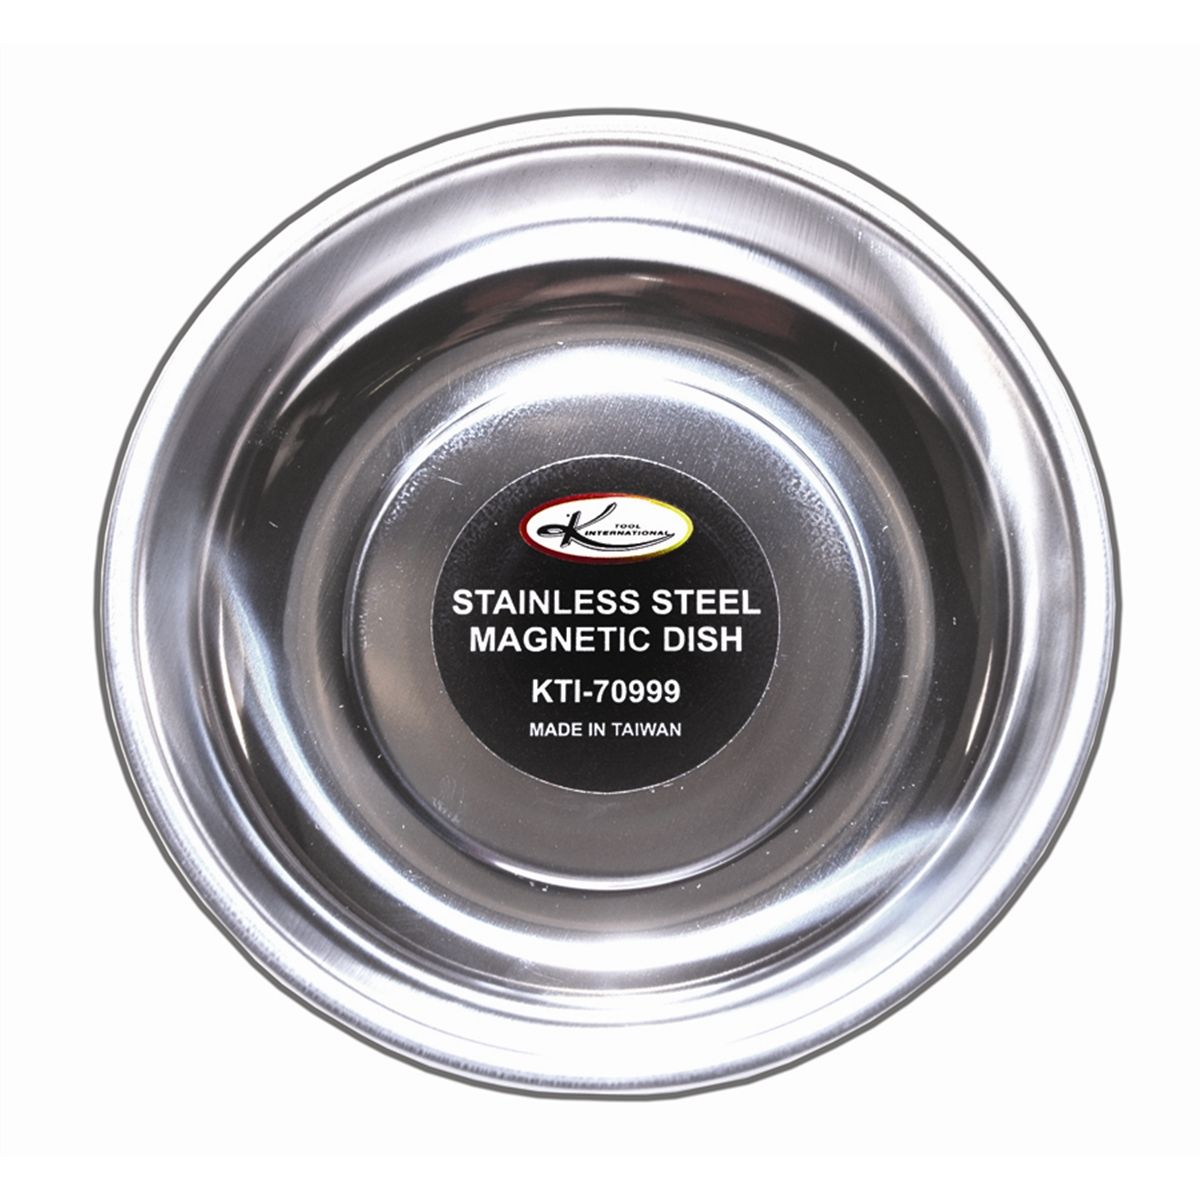 Stainless Steel Magnetic Dish - 5-3/4 In Diameter